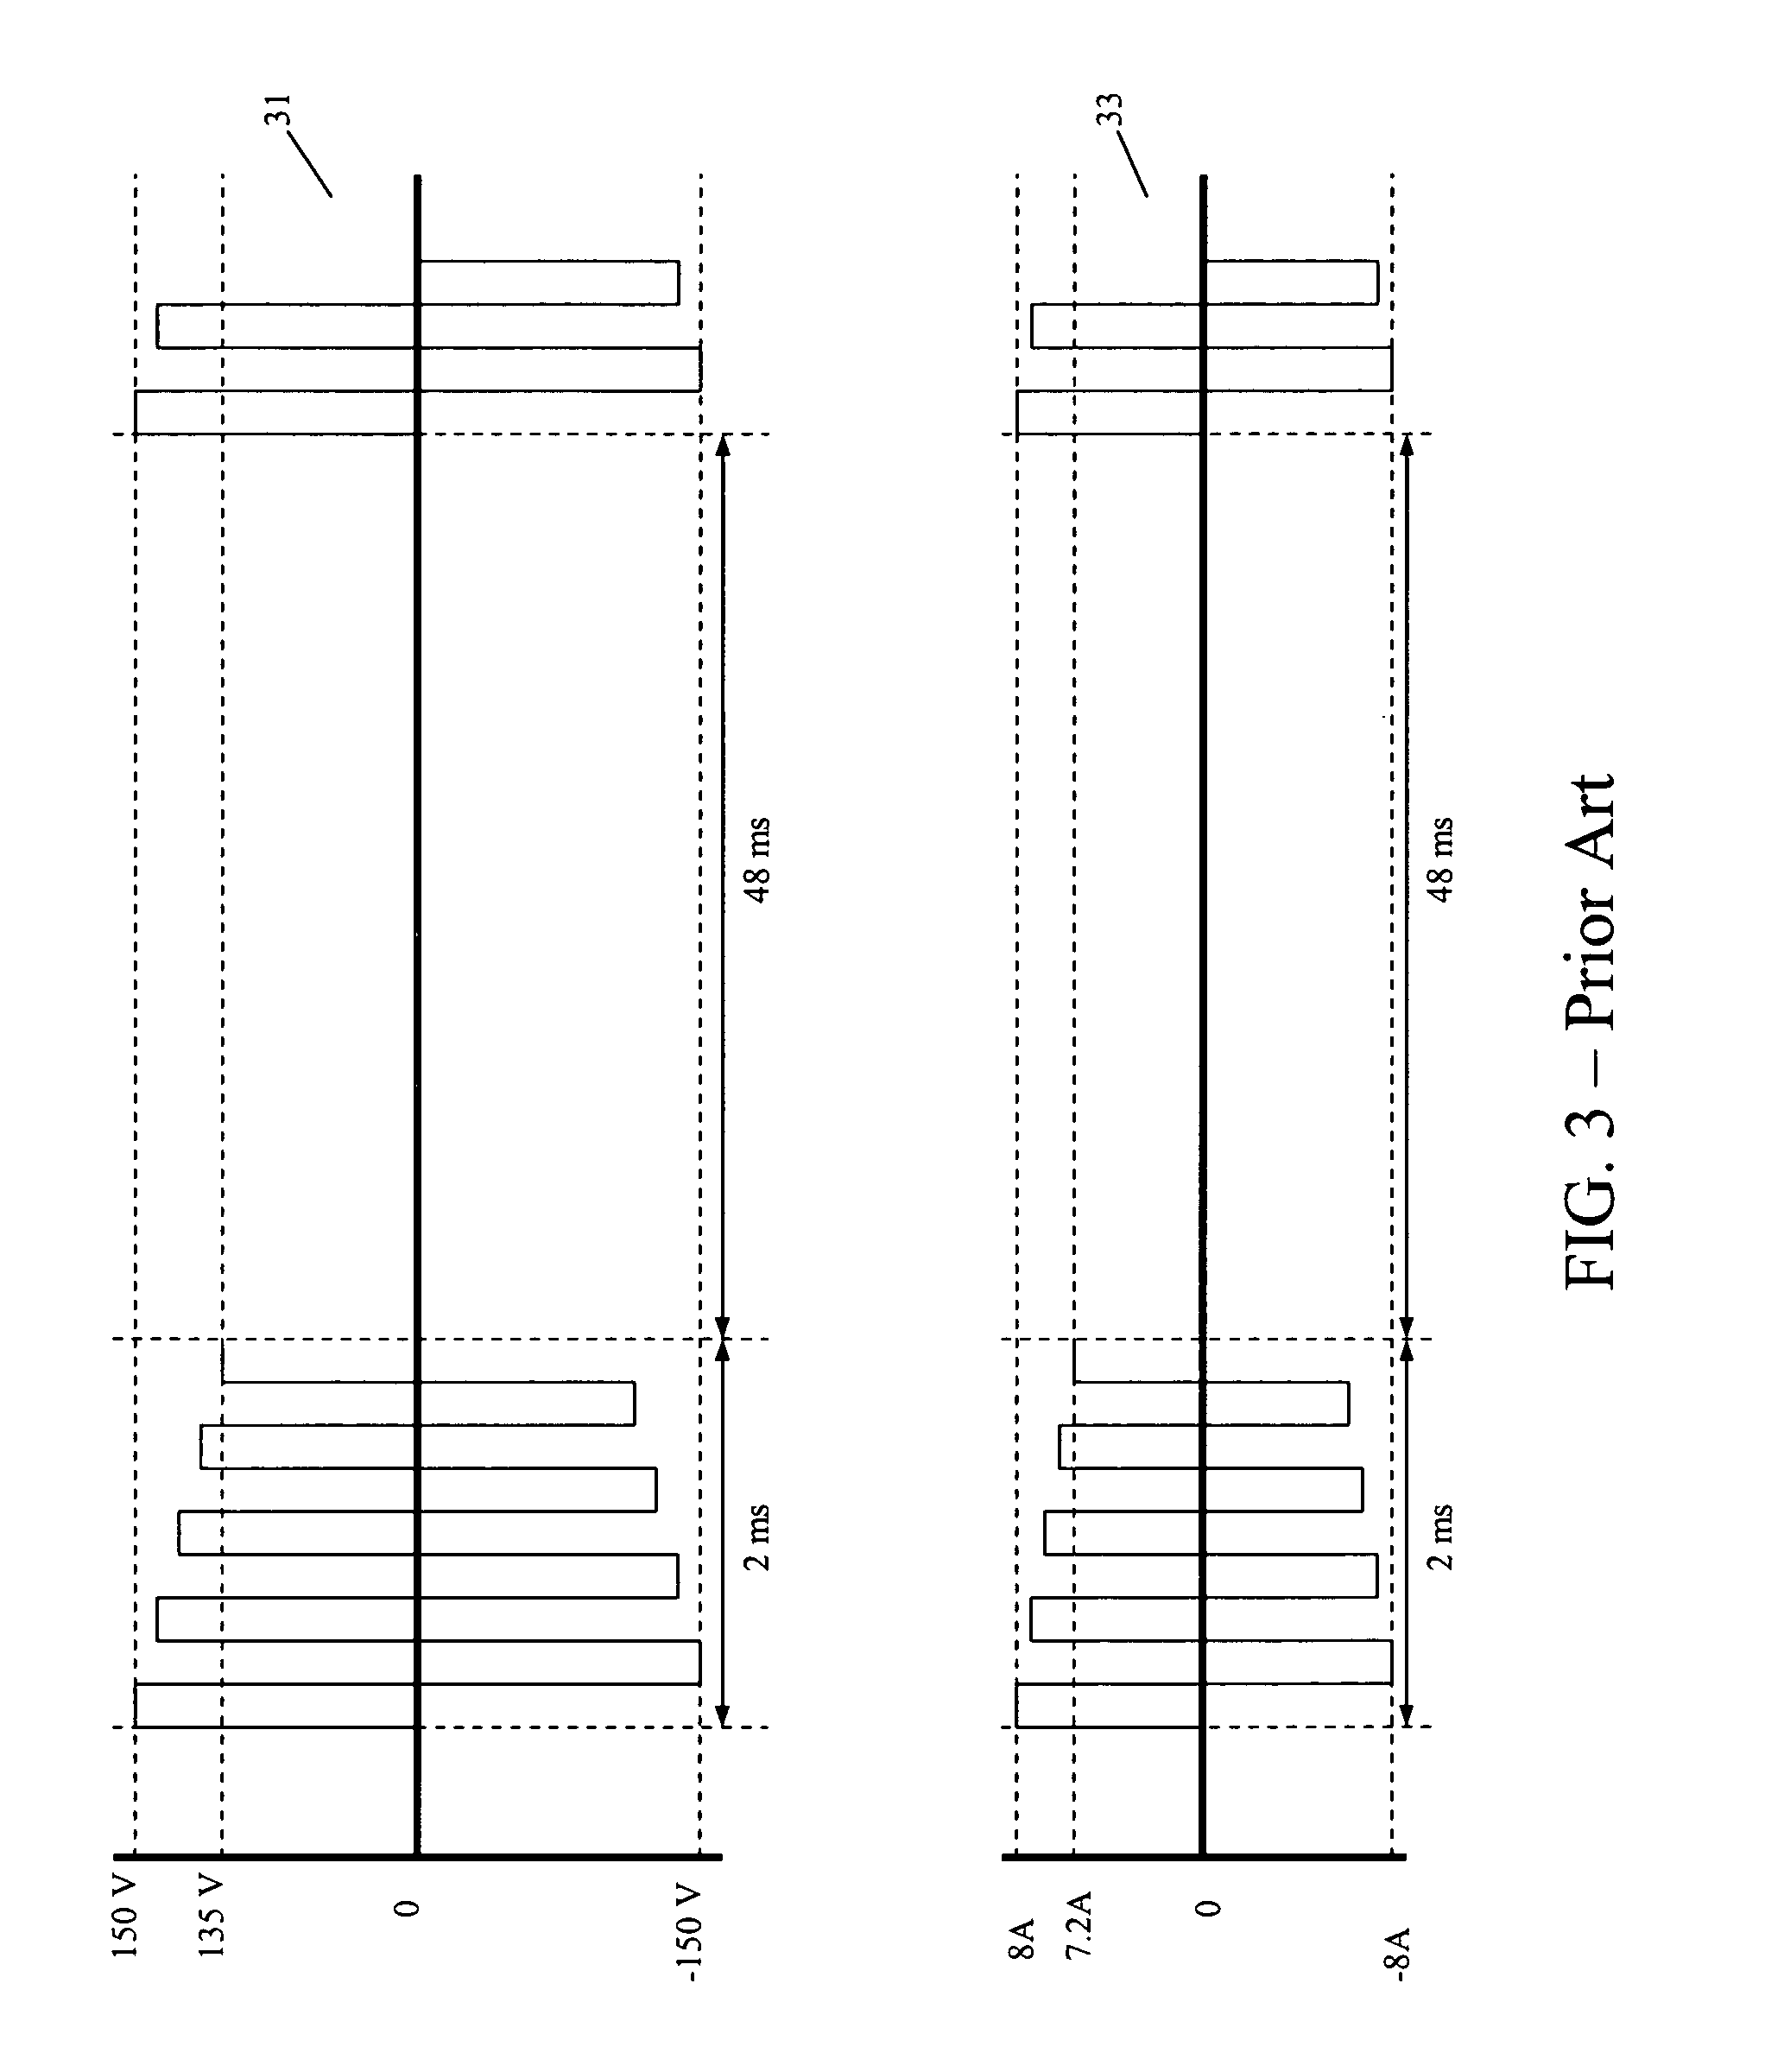 Method and system for providing current leveling capability